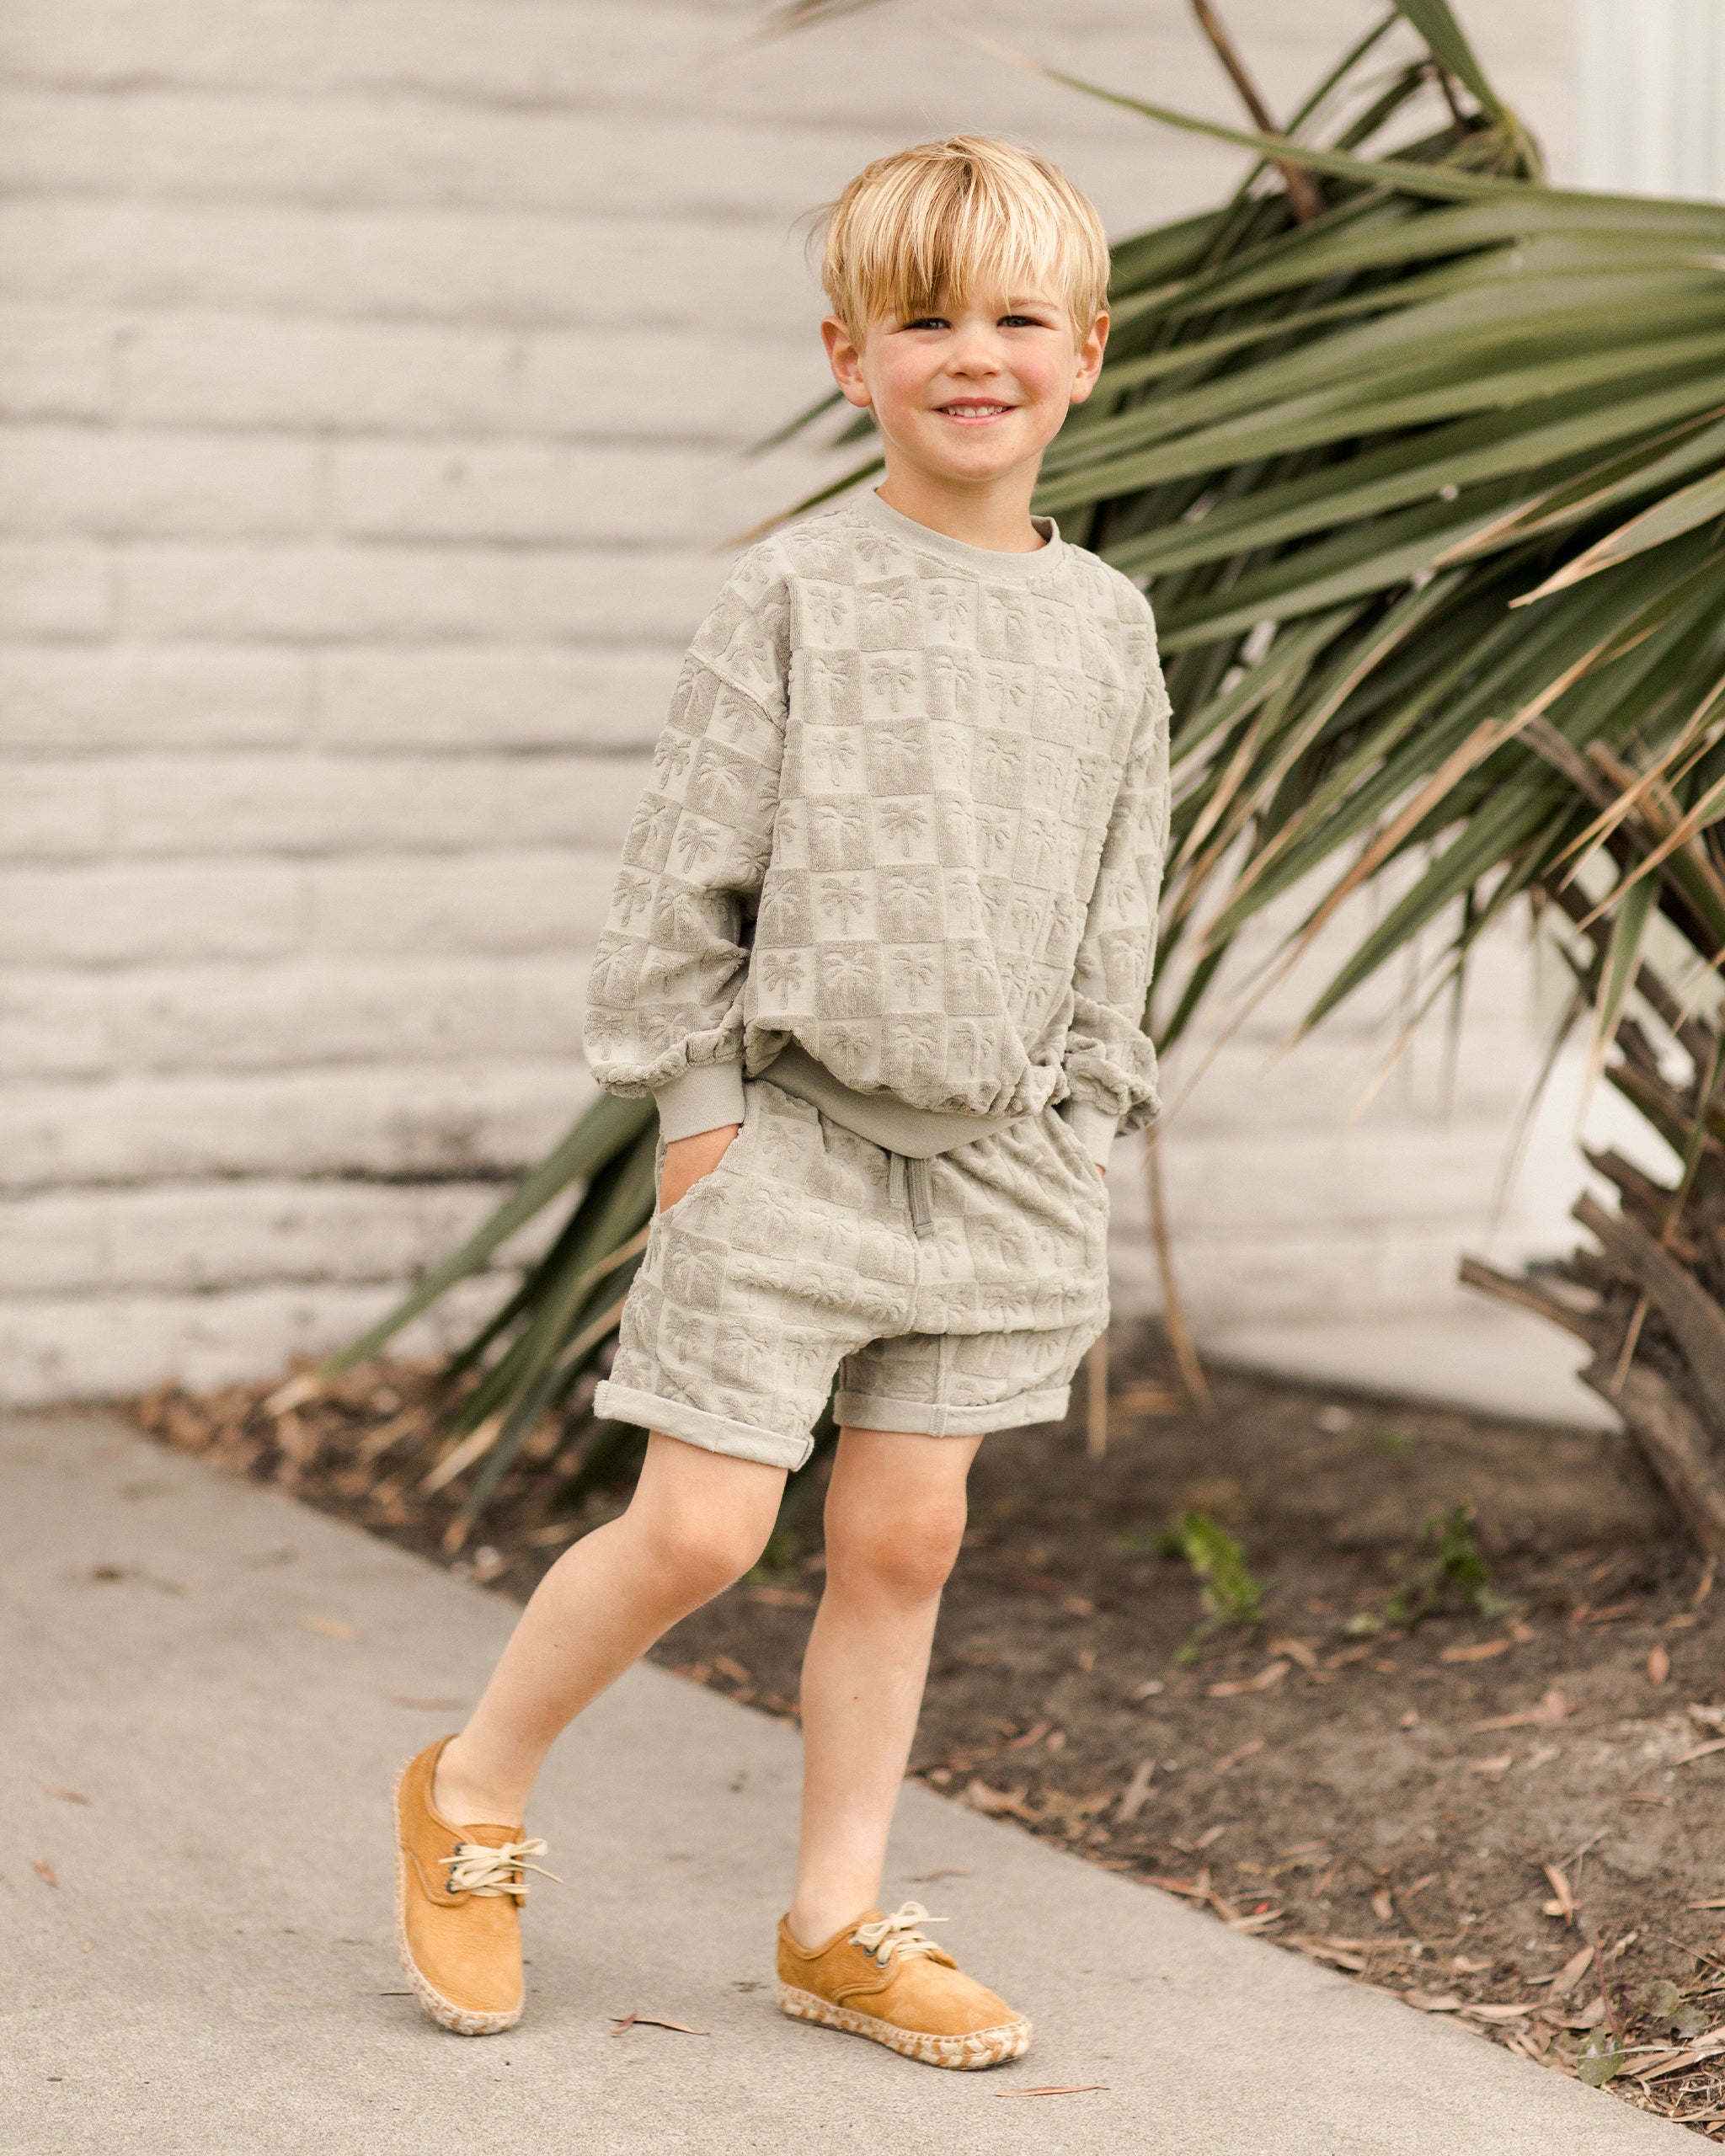 Sweatshirt || Palm Check - Rylee + Cru | Kids Clothes | Trendy Baby Clothes | Modern Infant Outfits |